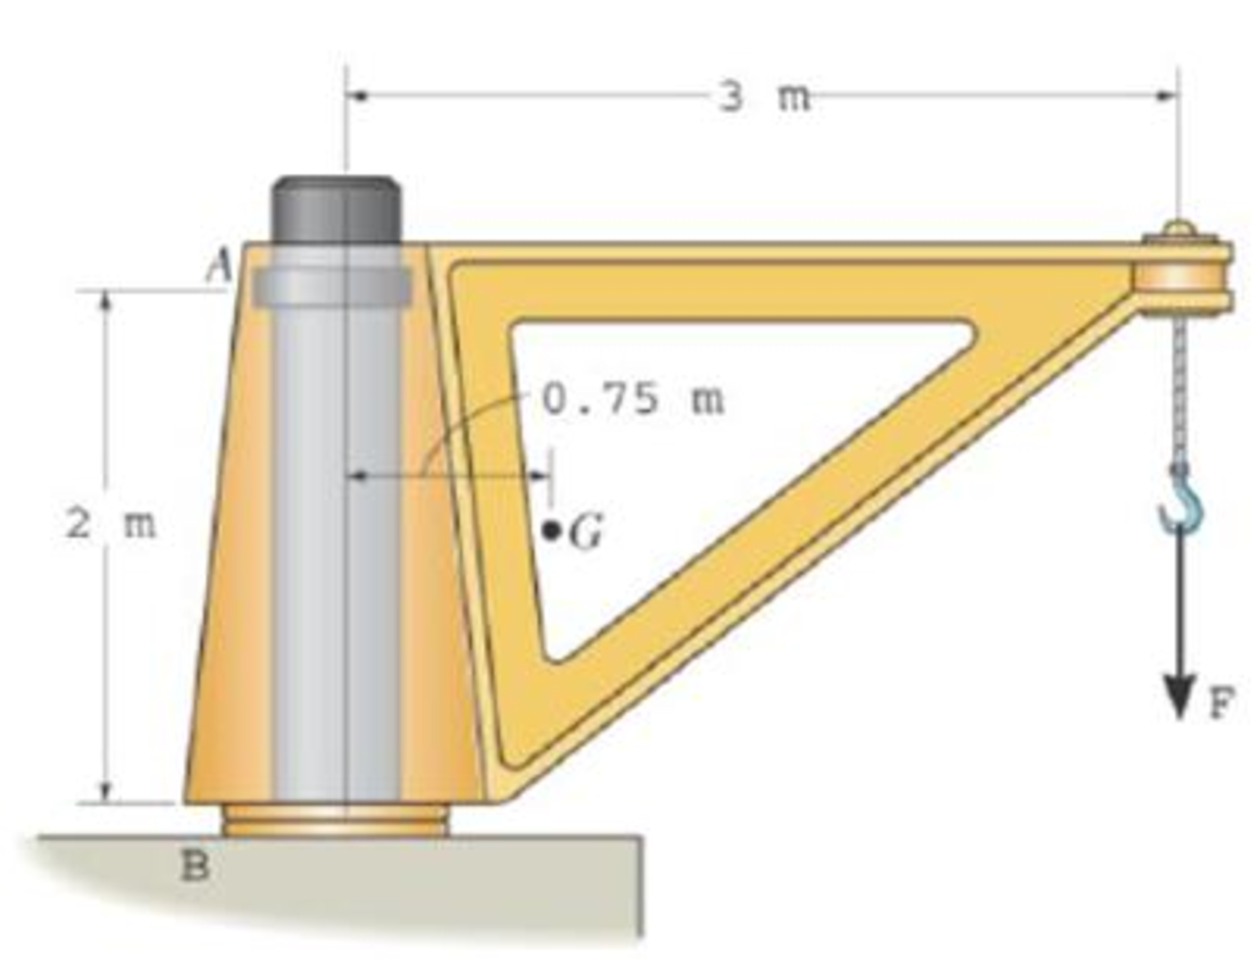 Chapter 5.4, Problem 34P, The dimensions of a jib crane, which is manufactured by the Basick Co., are given in the figure The 